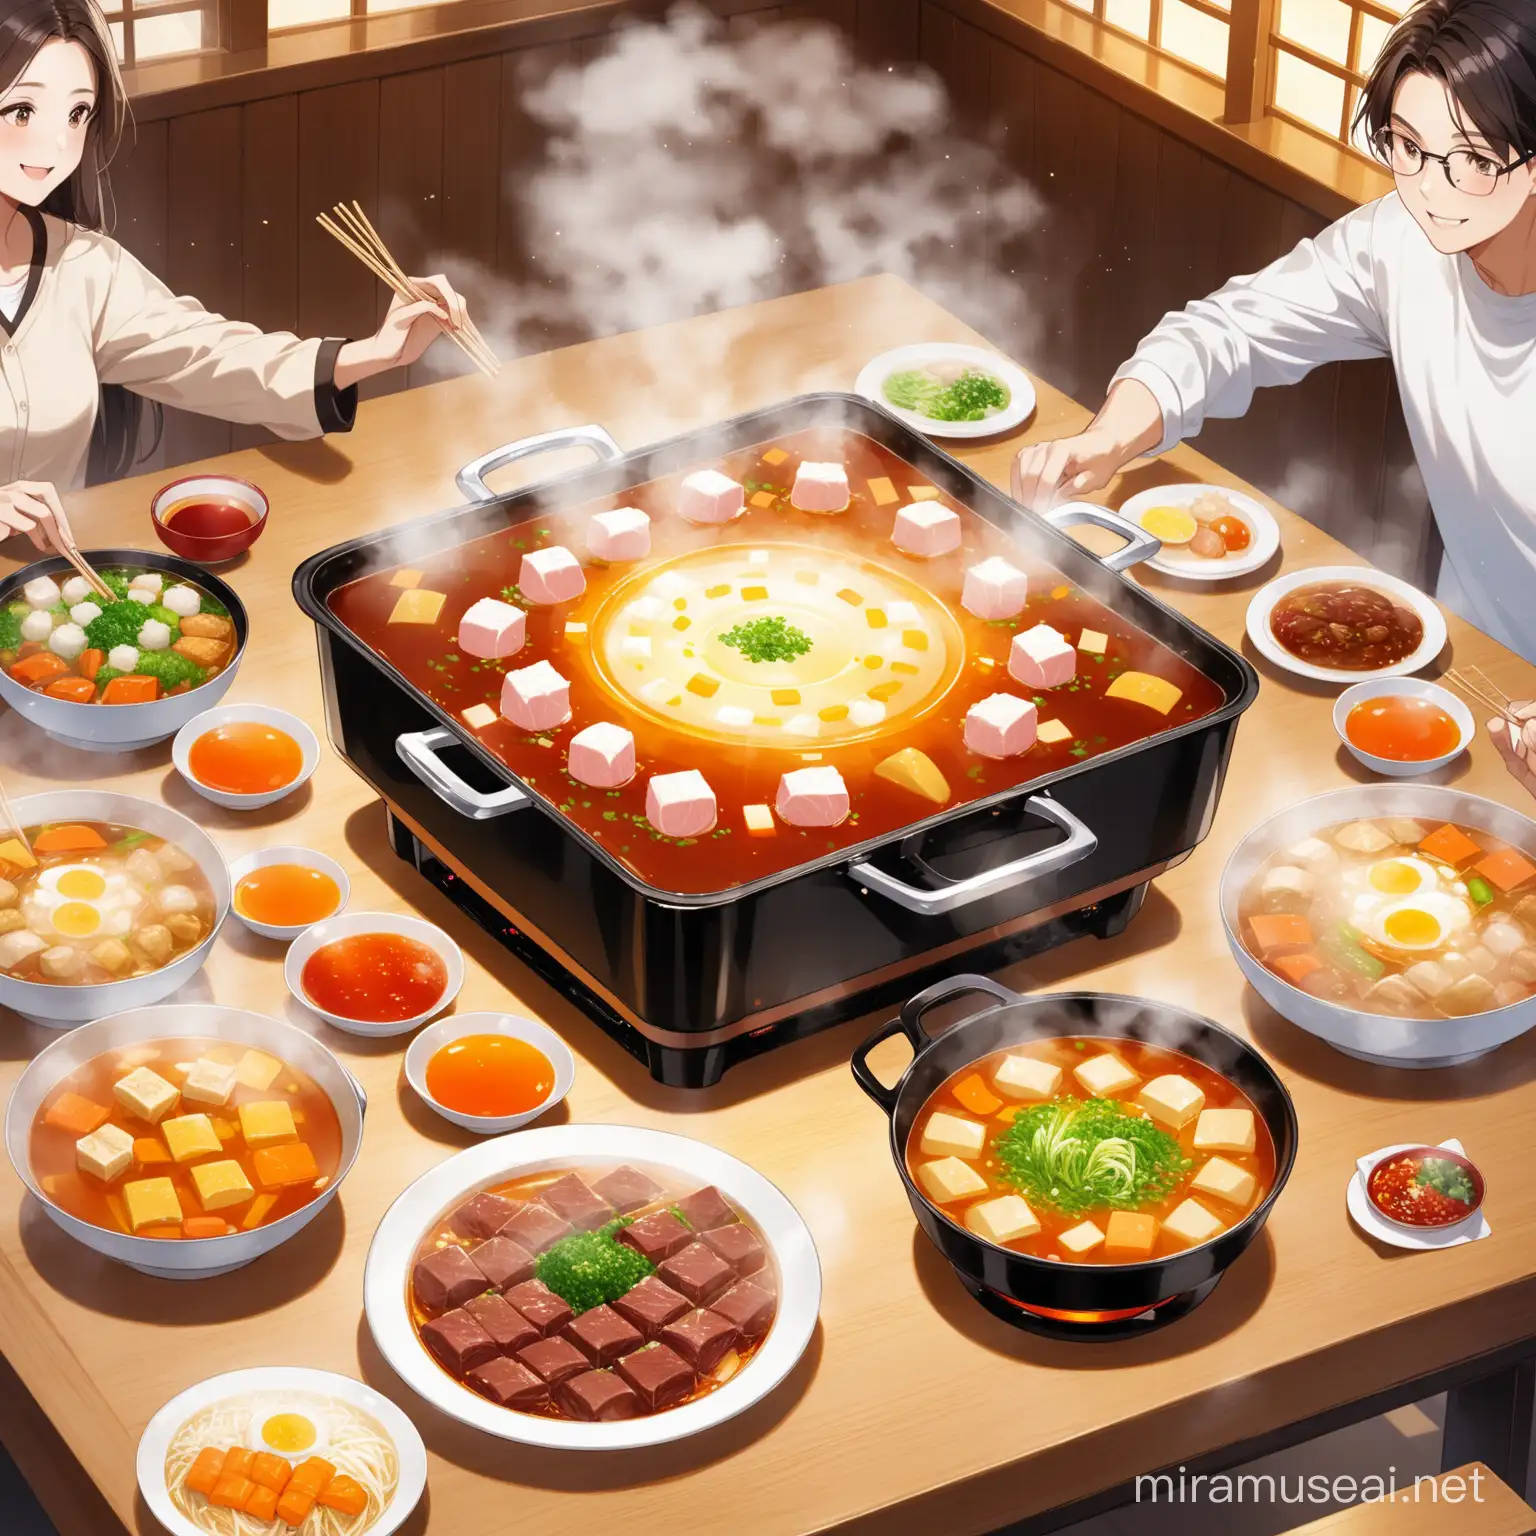 Celebratory Hotpot Feast with Toasting Friends